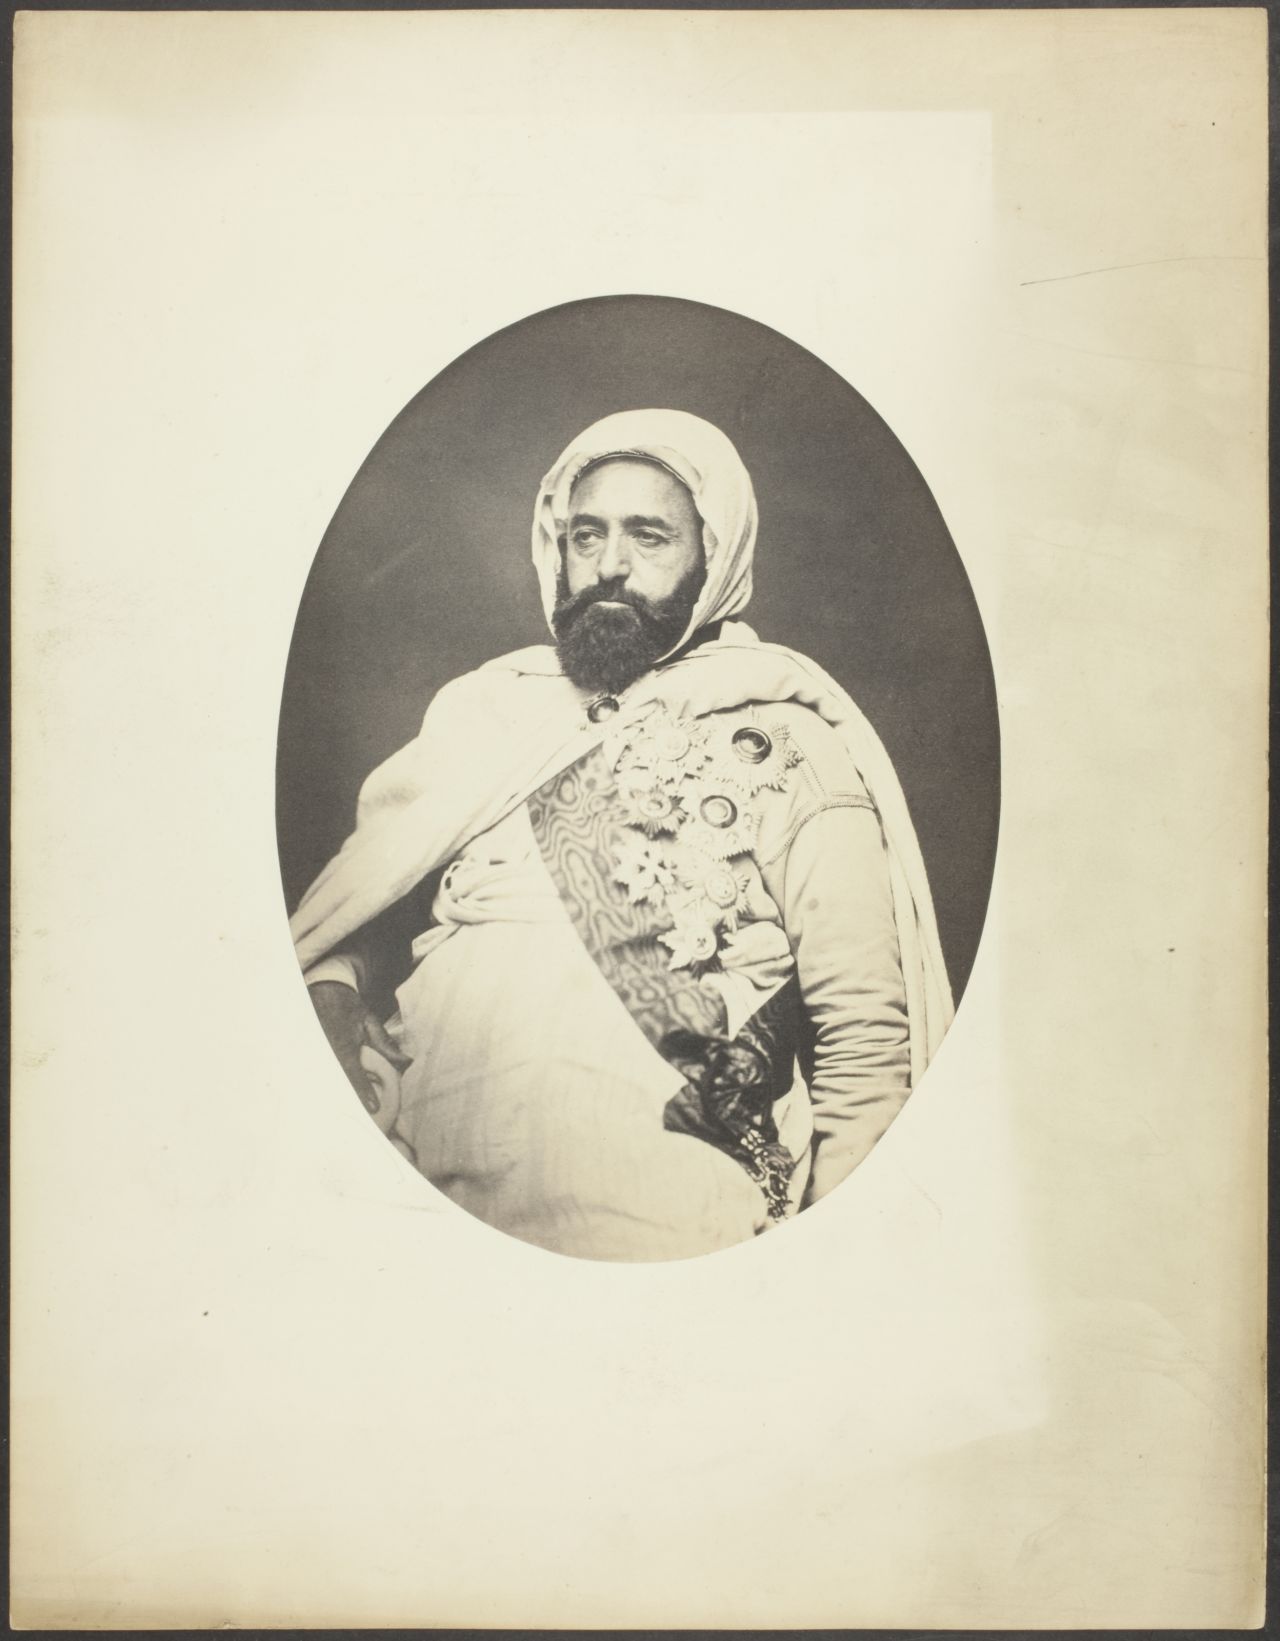 Emir Abdelkader, a key figure in the Algerian resistance, photographed by Jacques Philippe Potteau in Paris.